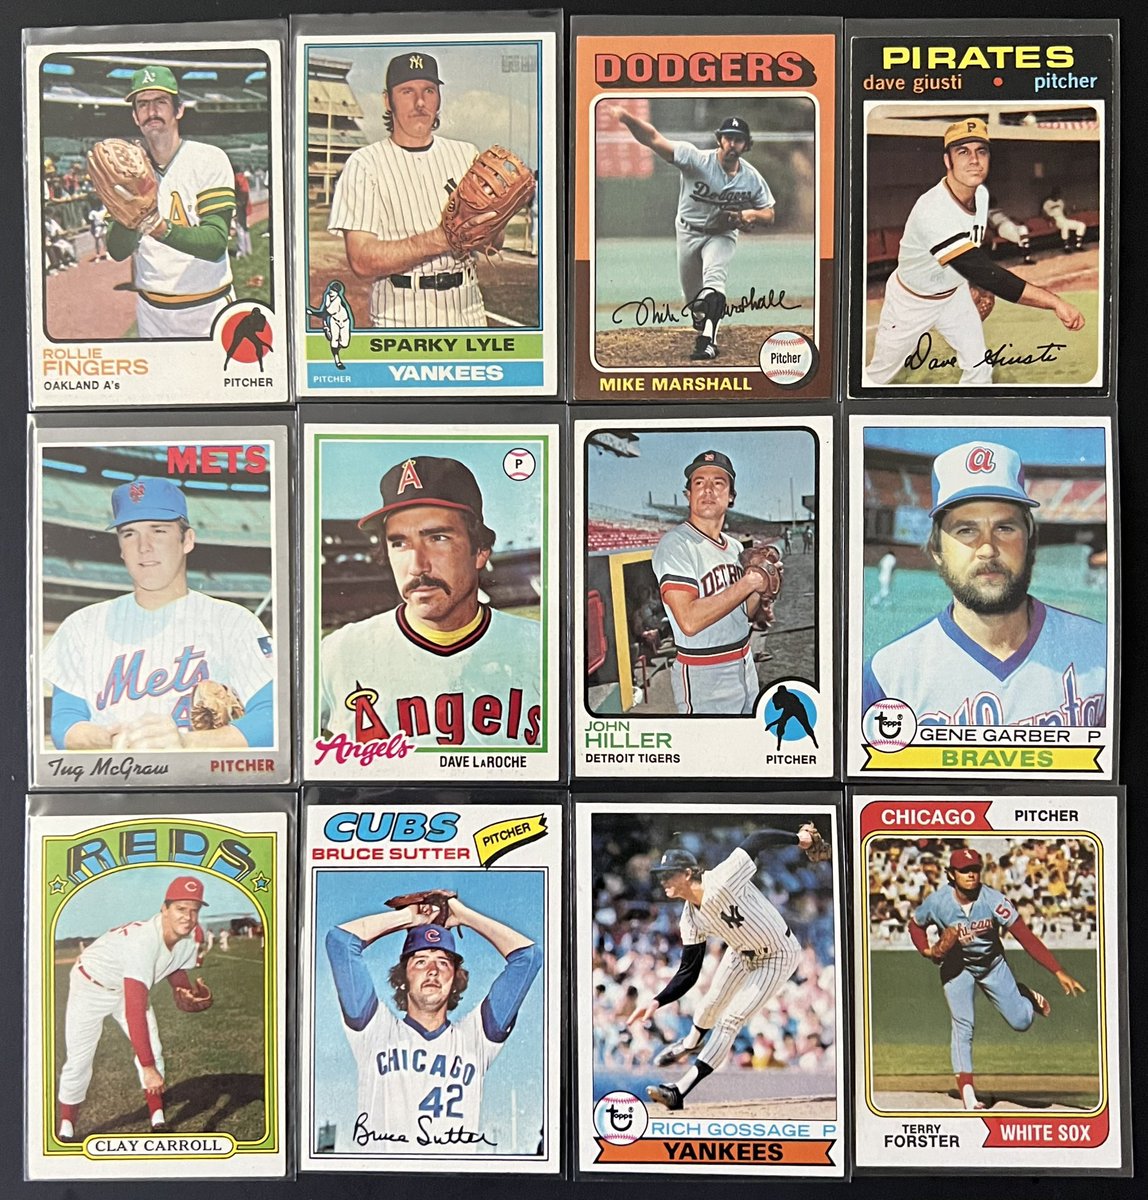 Carpet o’ Cards: Relievers with 100+ saves during the 1970s, when the modern closer role began to emerge. Fingers tops with 209 for the decade. Sutter saved 105 in 3+ seasons.